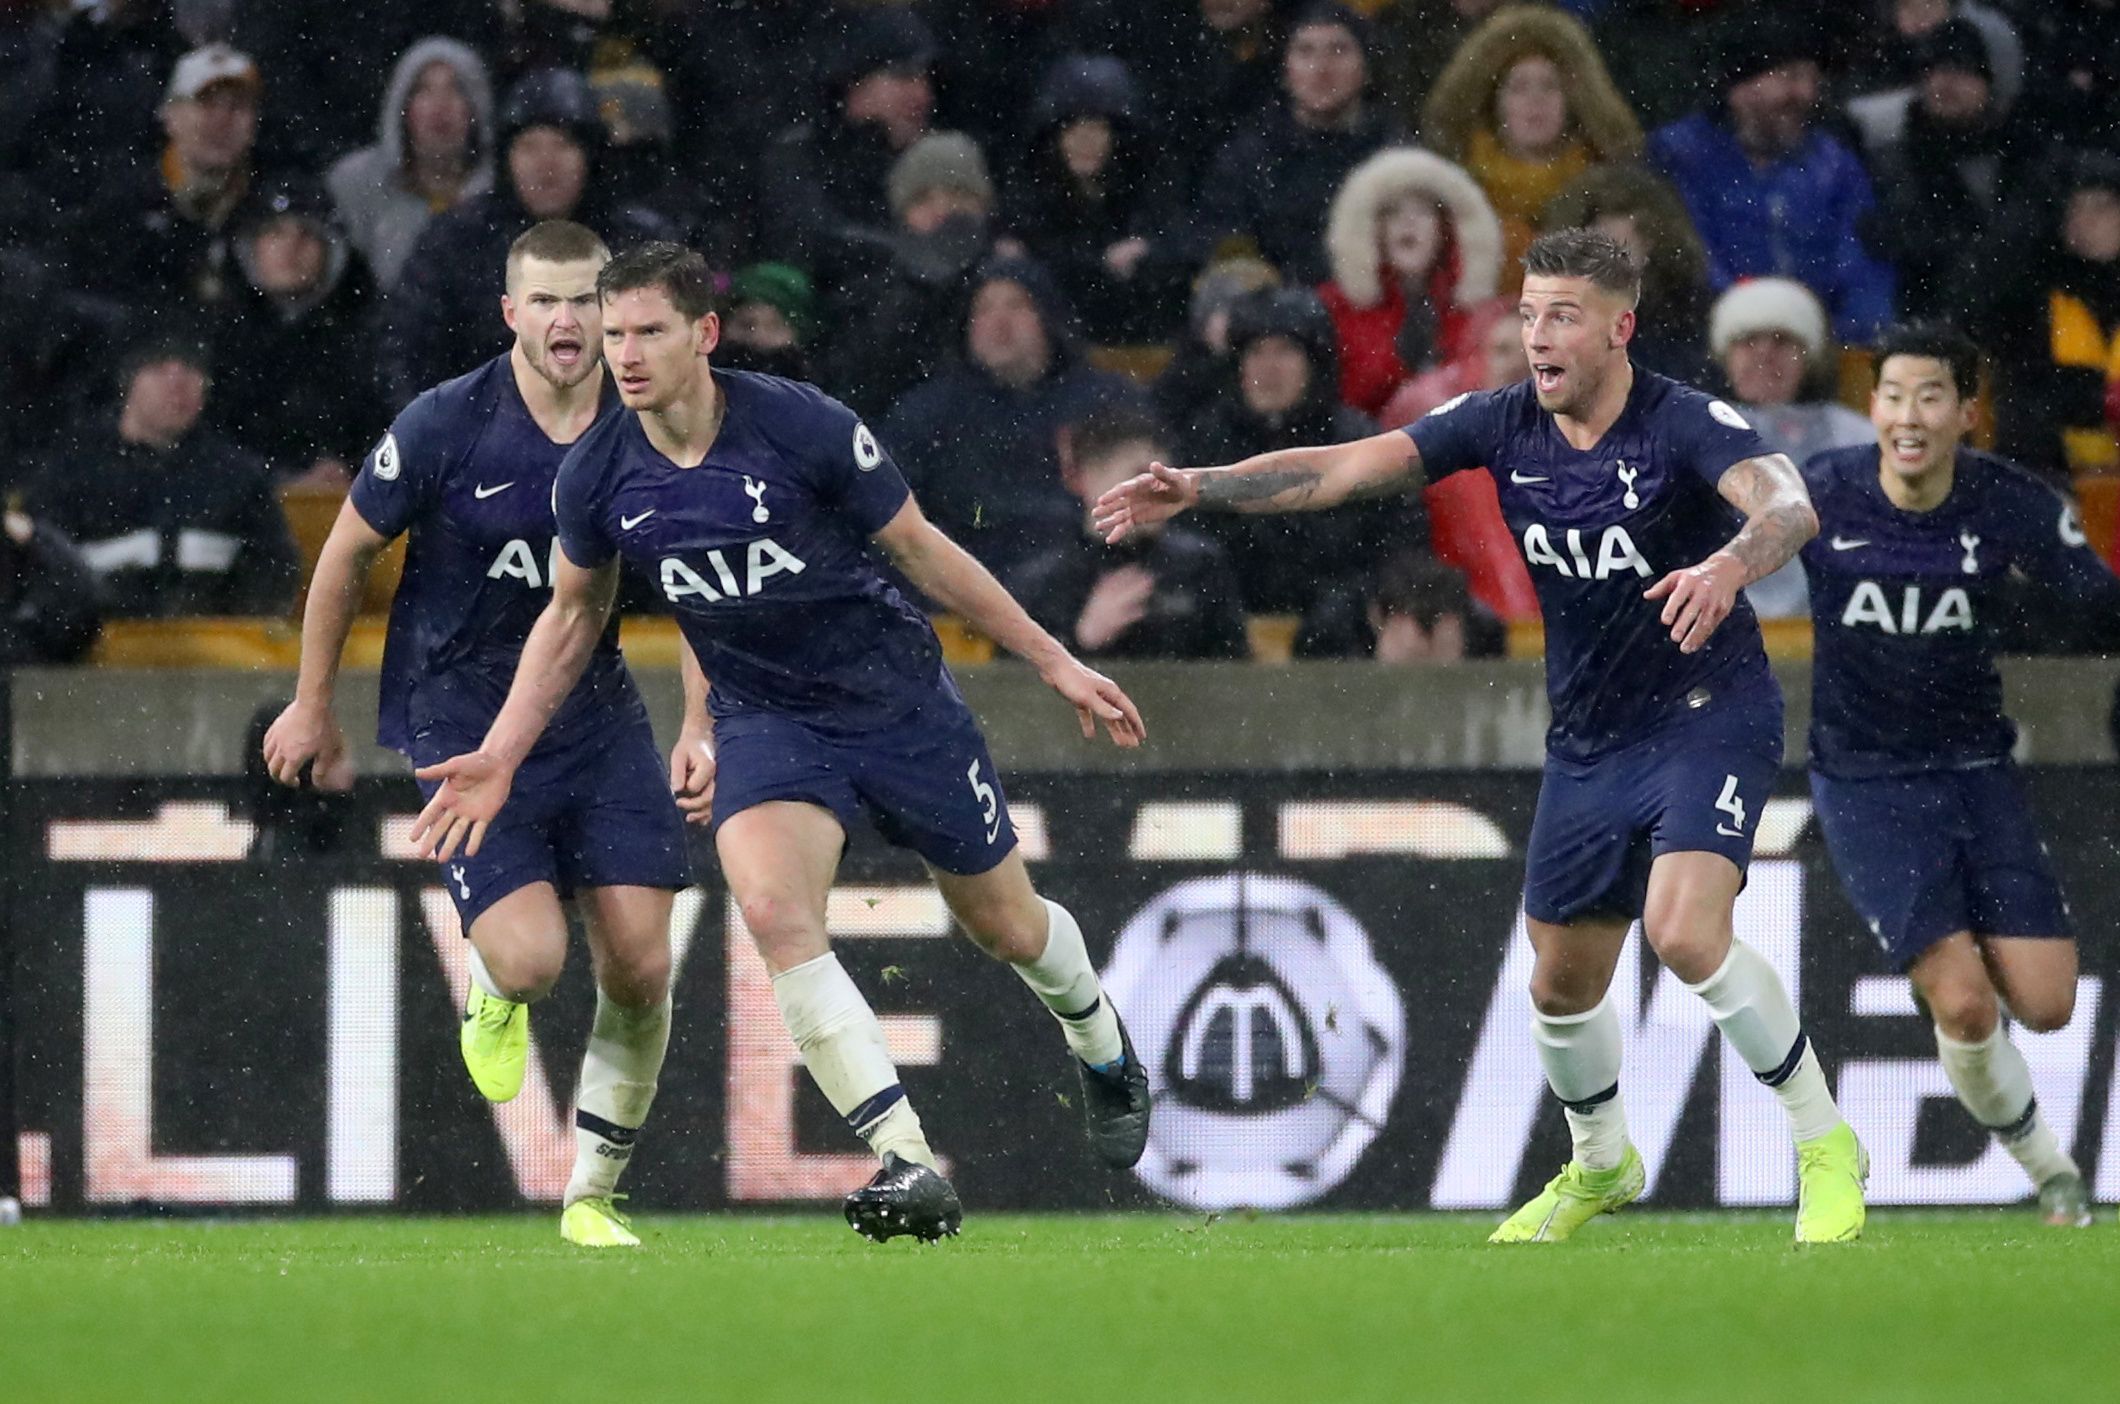 Soccer Football - Premier League - Wolverhampton Wanderers v Tottenham Hotspur - Molineux Stadium, Wolverhampton, Britain - December 15, 2019  Tottenham Hotspur's Jan Vertonghen celebrates scoring their second goal with teammates            Action Images via Reuters/Carl Recine  EDITORIAL USE ONLY. No use with unauthorized audio, video, data, fixture lists, club/league logos or 